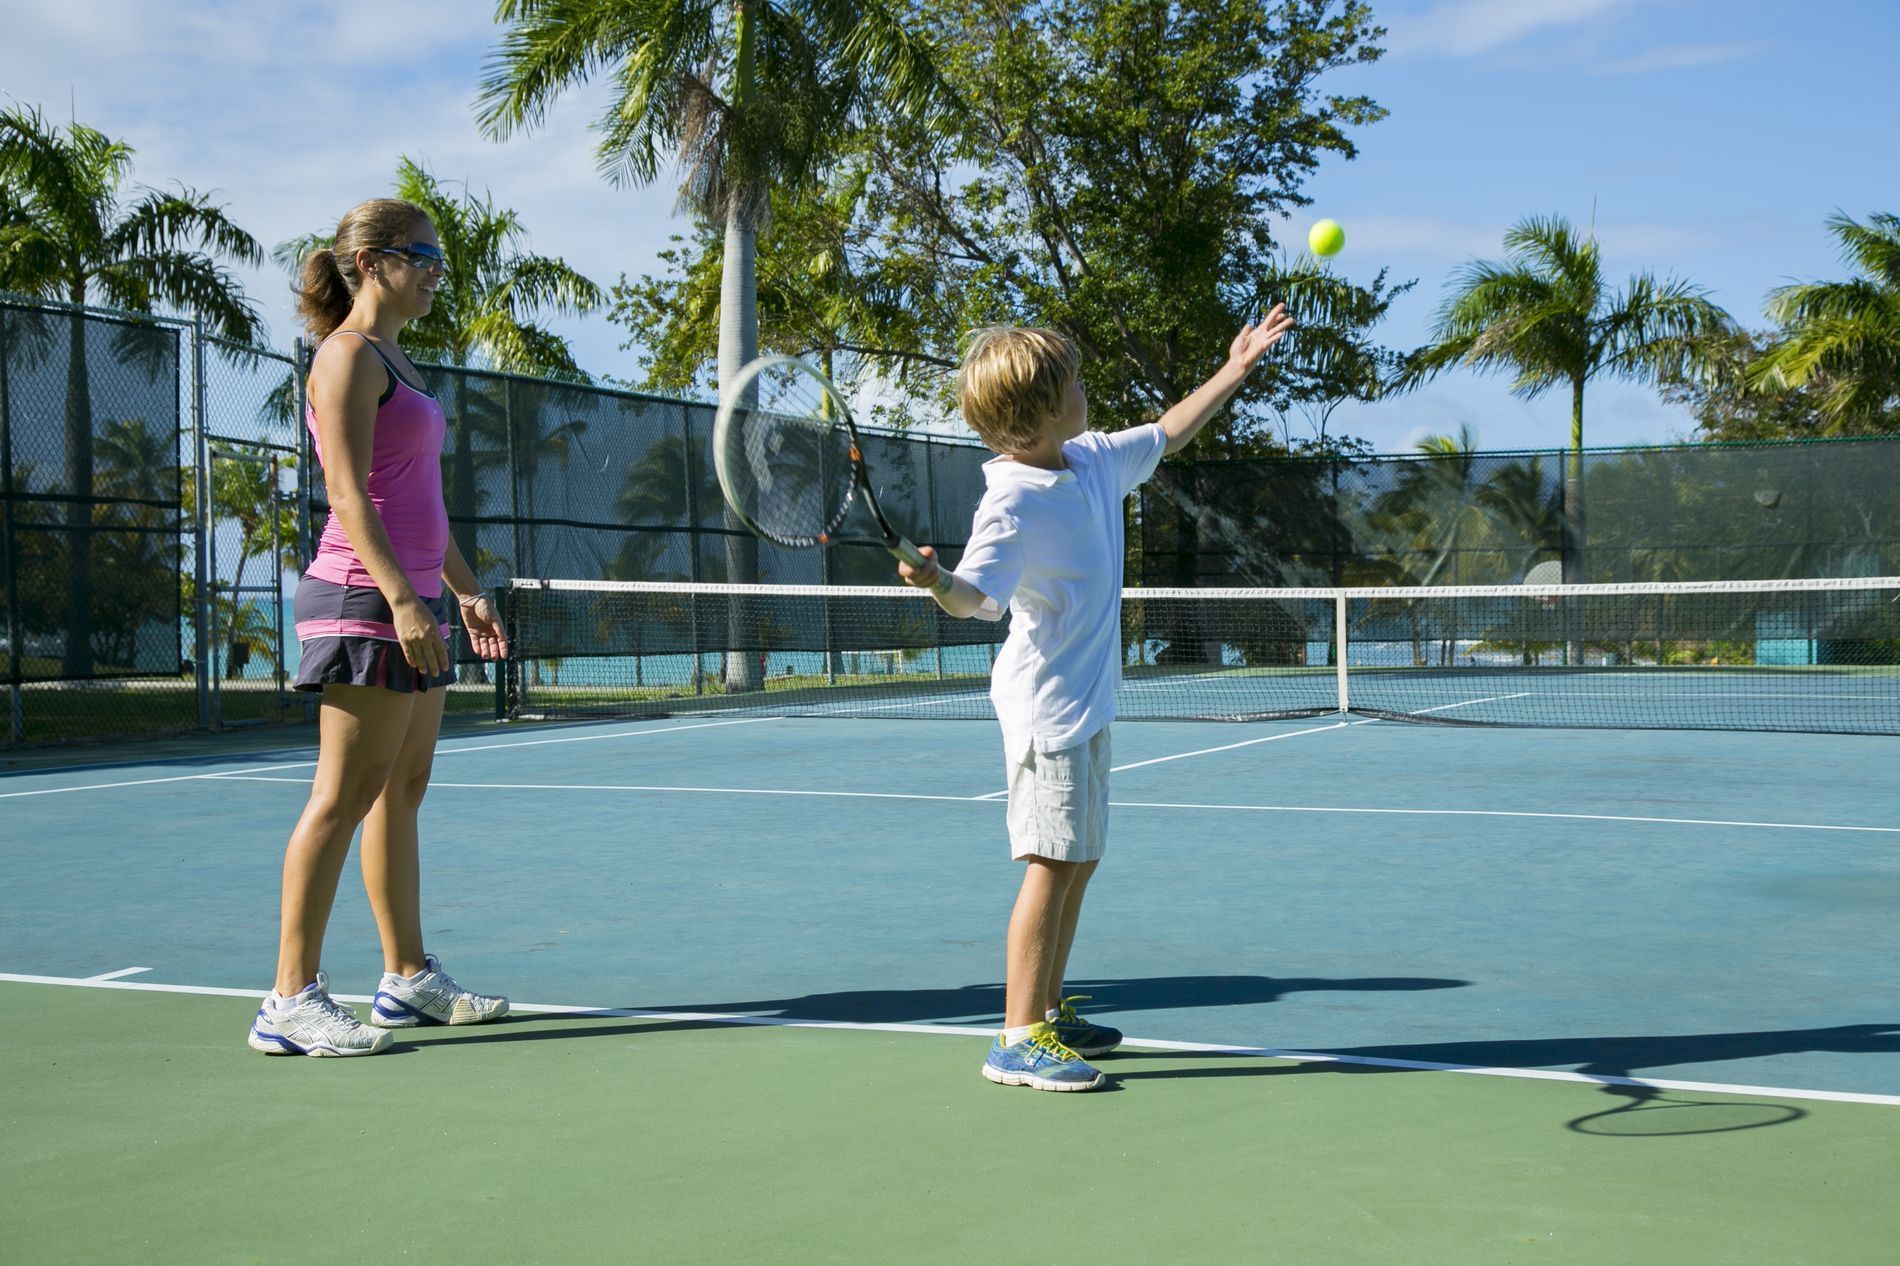 A mom & son playing at a tennis court in Buccaneer Hotel